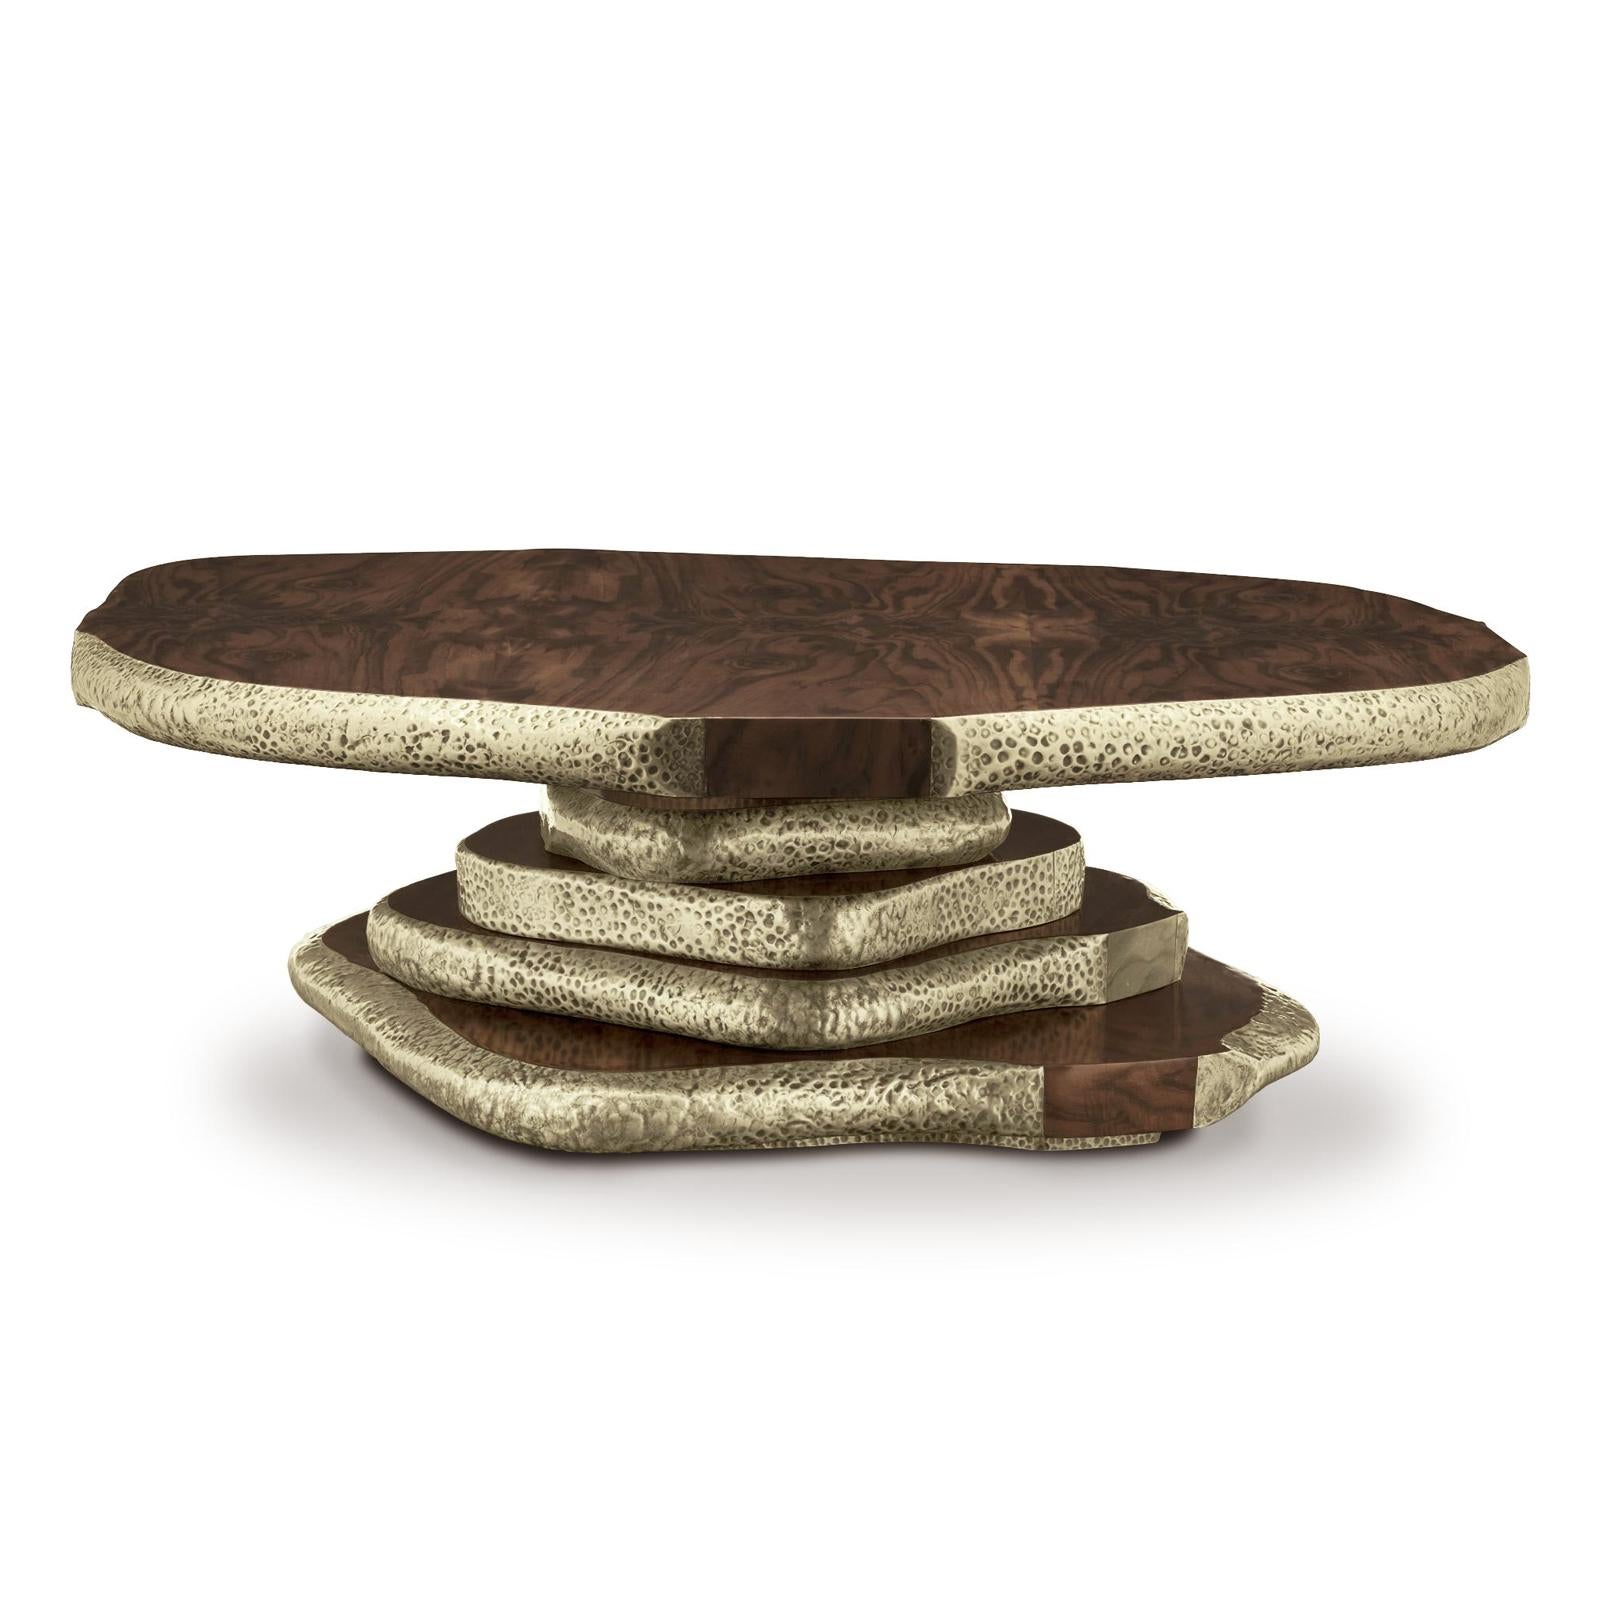 Coffee table walnut slices brassed made with
palisander veneer and walnut wood veneer.
With solid hand-hammered brass in glossy finish.
Also available in side table walnut slices brasses.